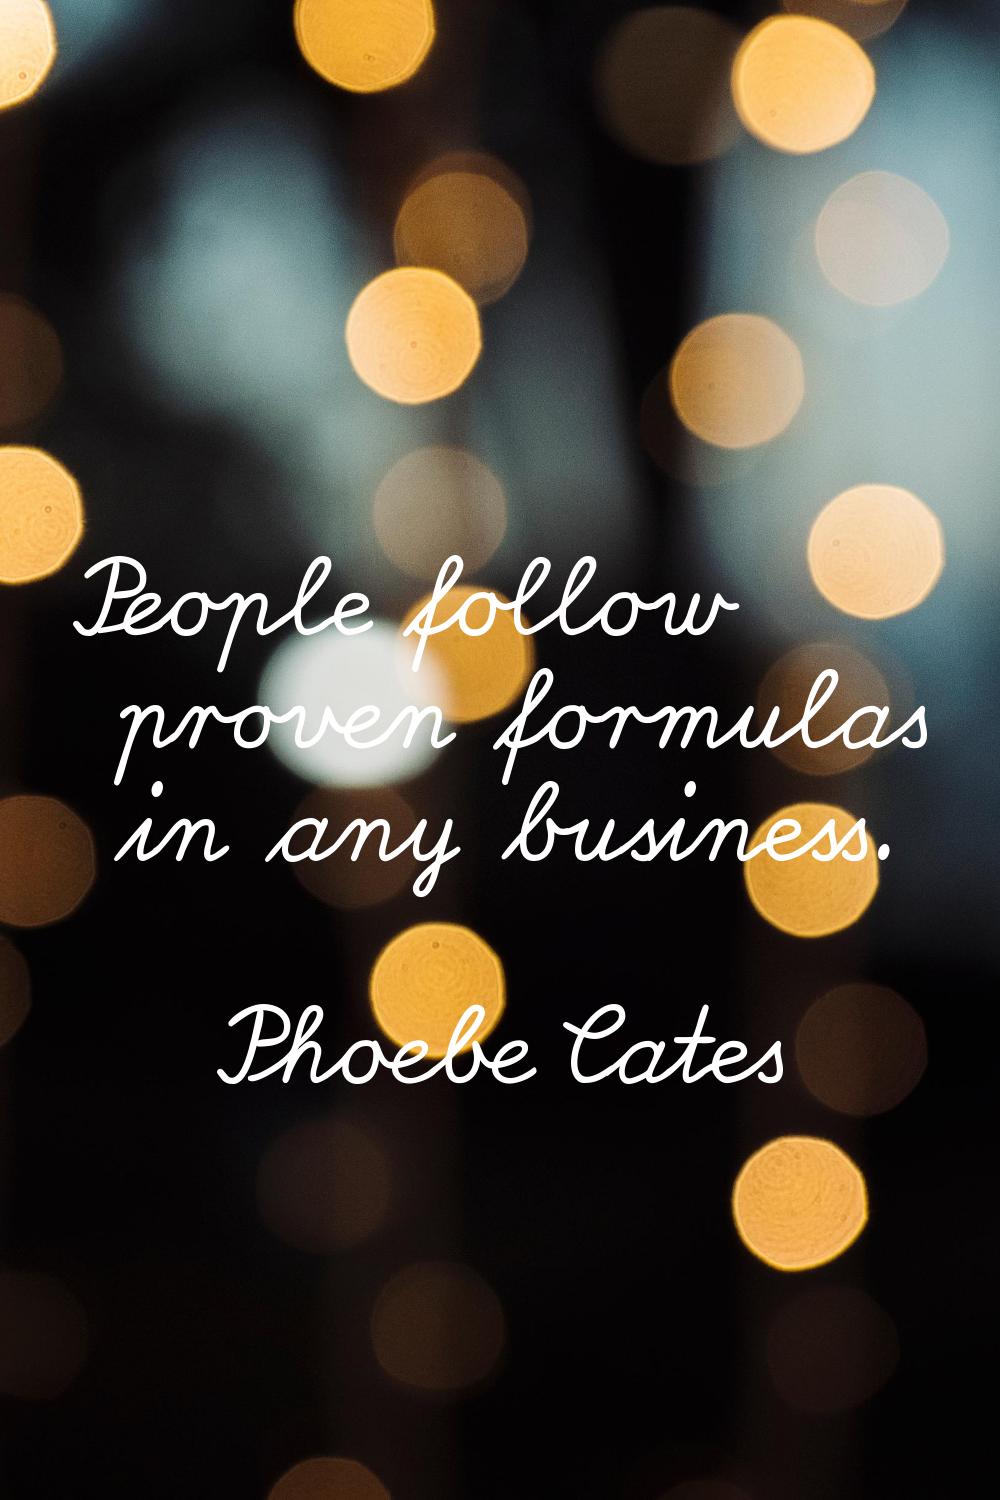 People follow proven formulas in any business.